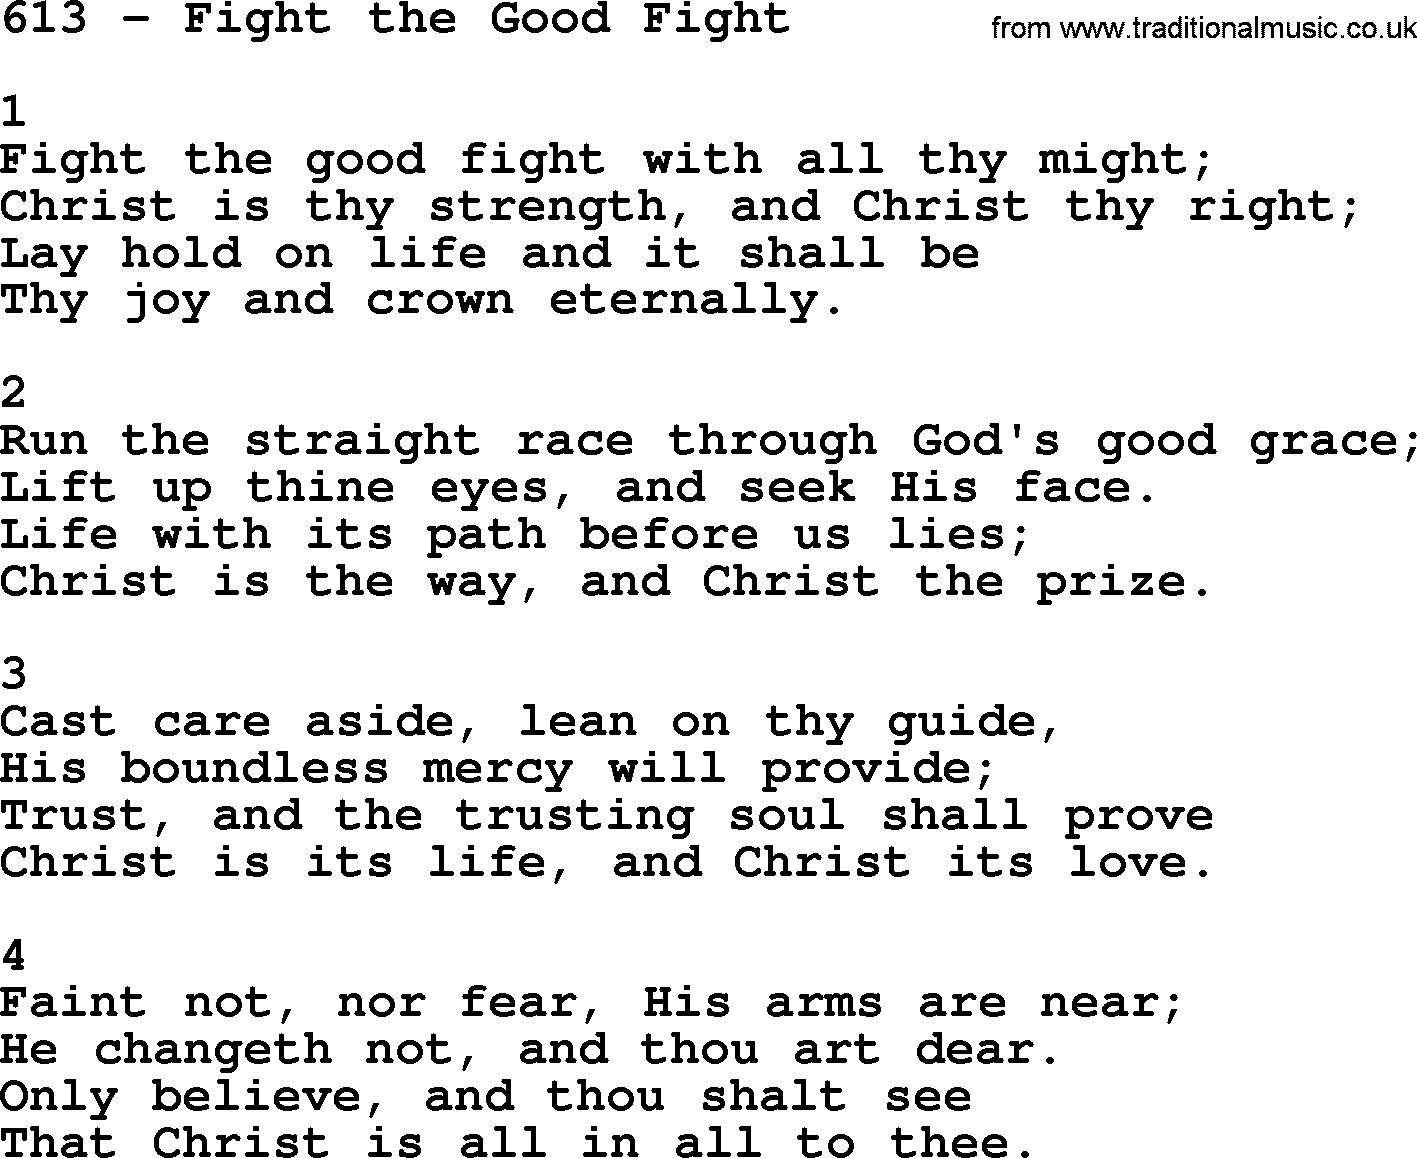 Complete Adventis Hymnal, title: 613-Fight The Good Fight, with lyrics, midi, mp3, powerpoints(PPT) and PDF,